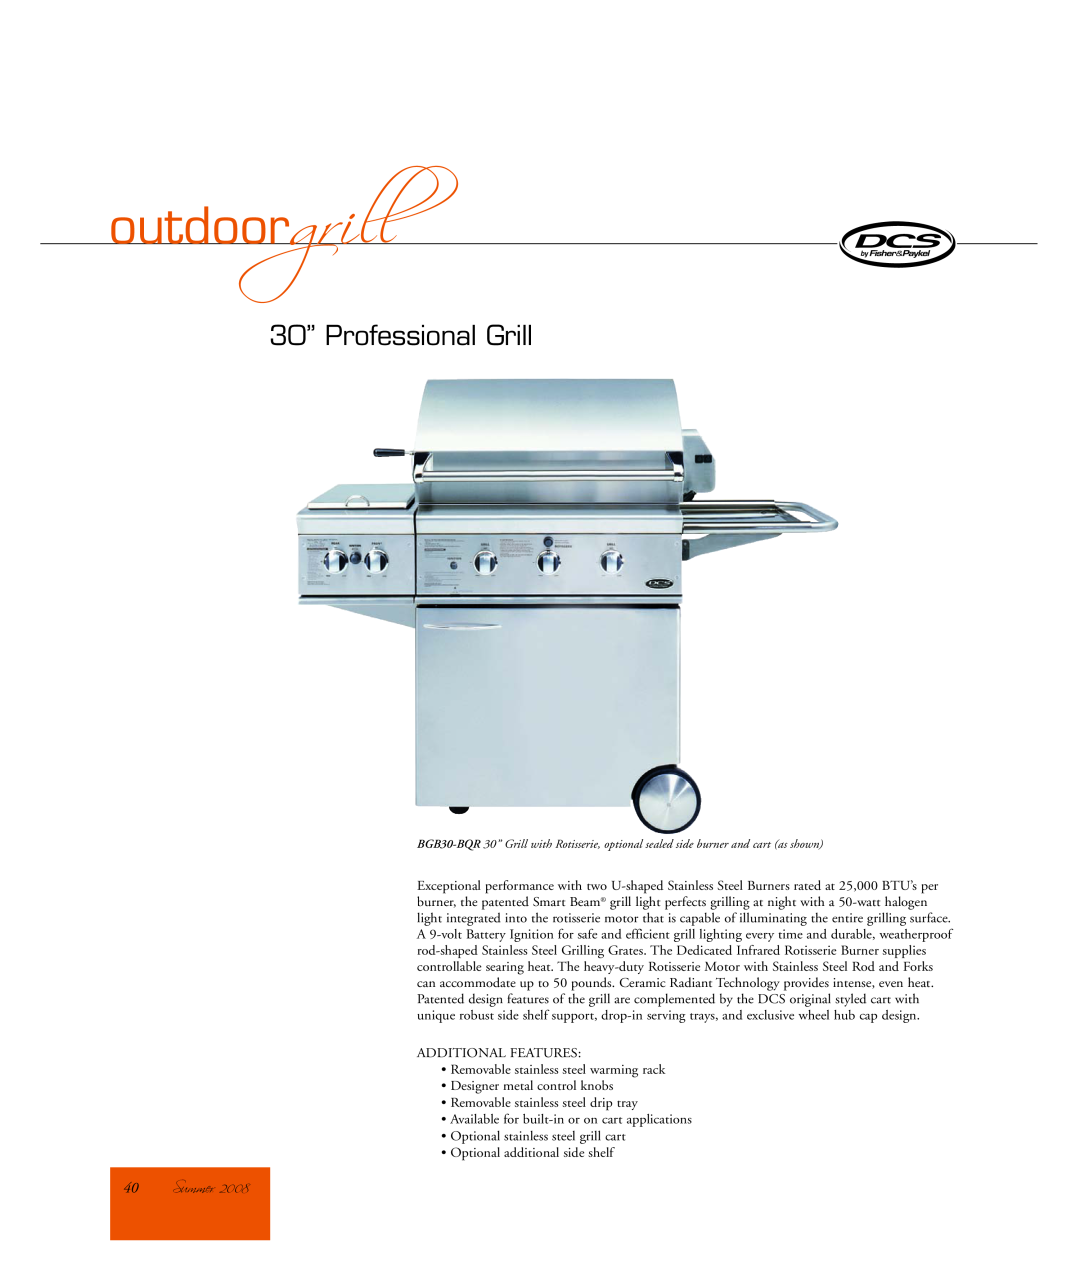 DCS OGP30iN manual Summer, outdoorgrill, 30” Professional Grill 